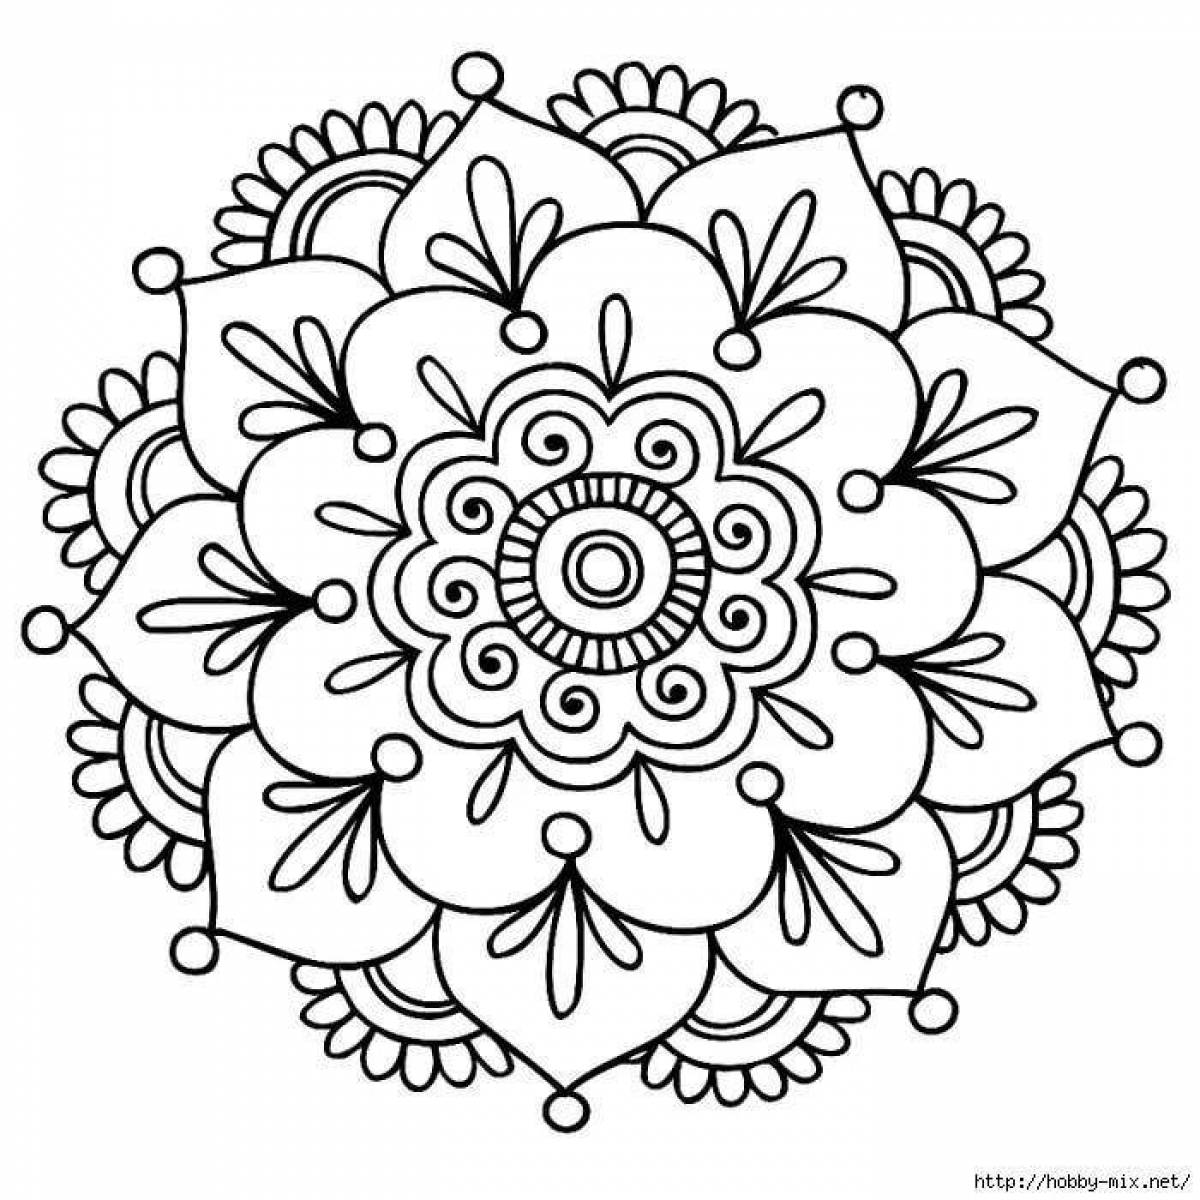 Delicate patterns and ornaments for coloring pages